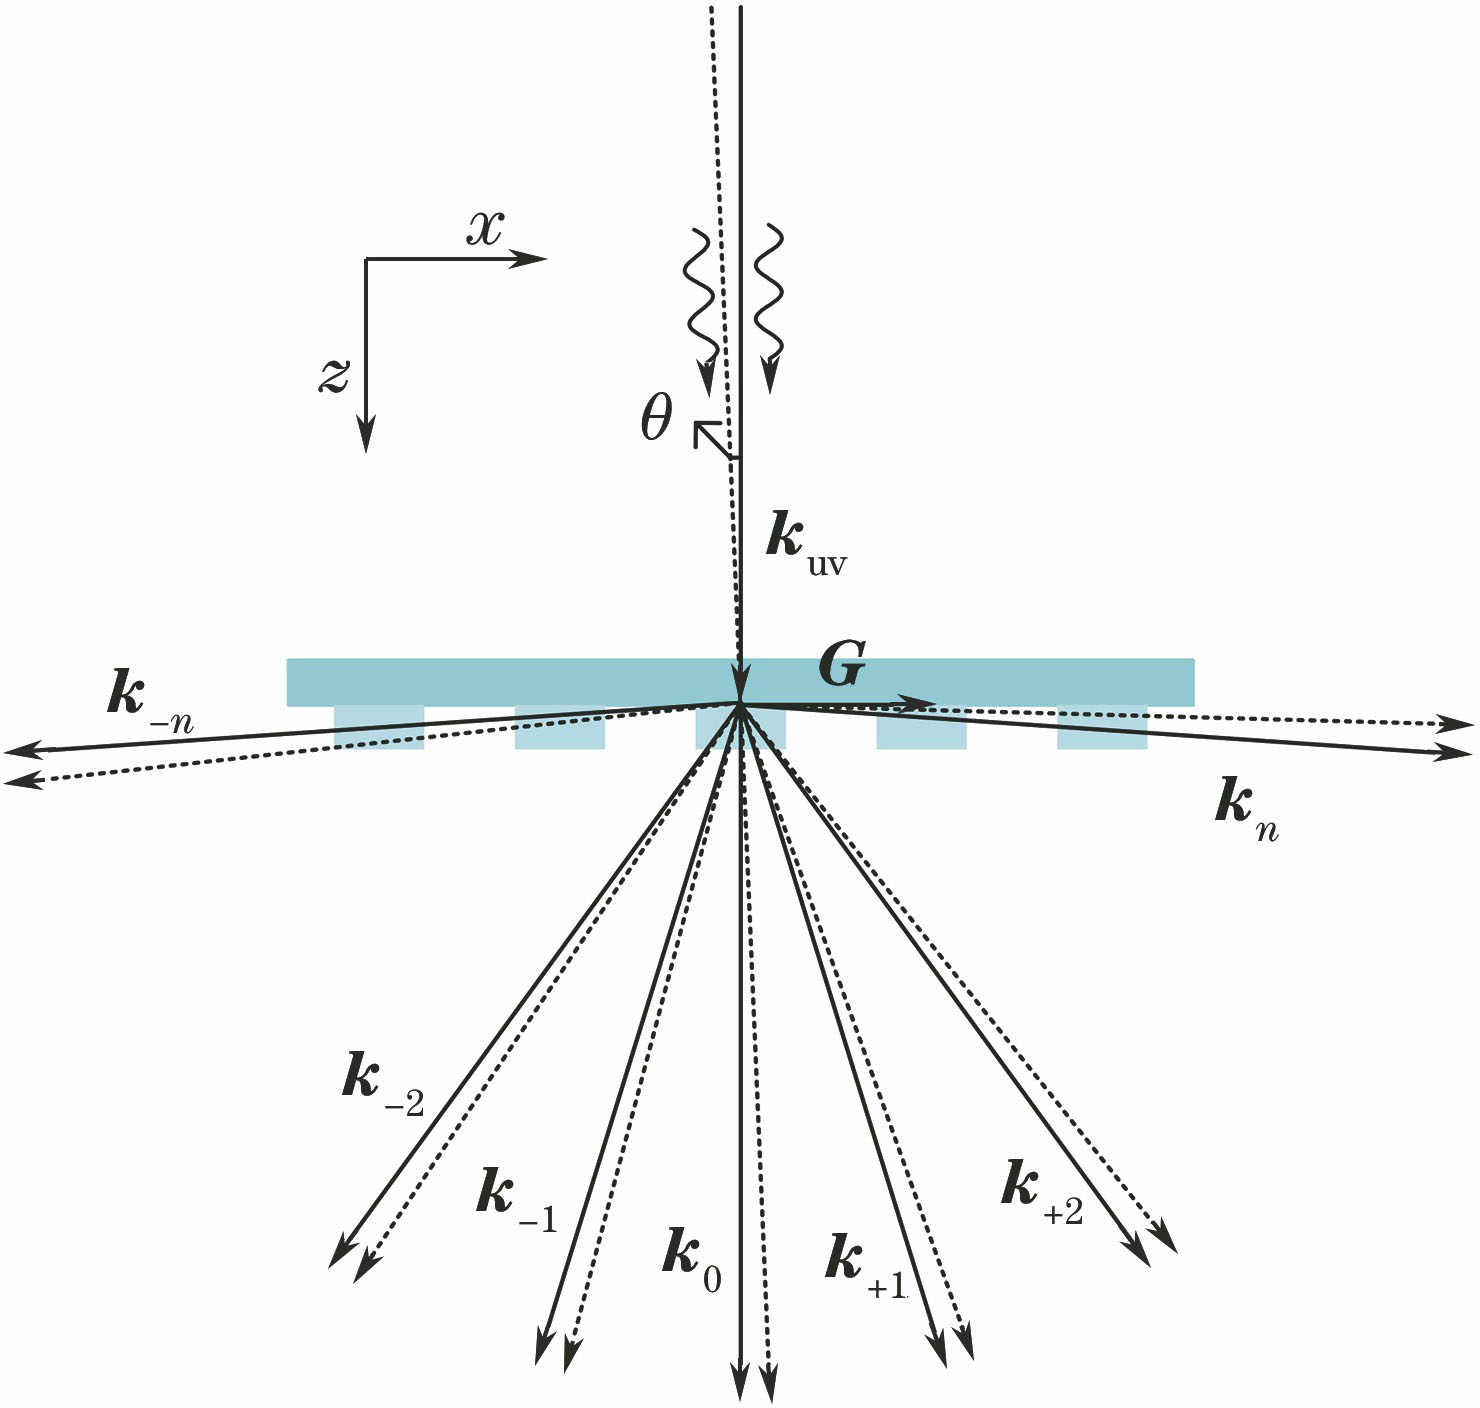 Wave vectors of incident and diffracted beams